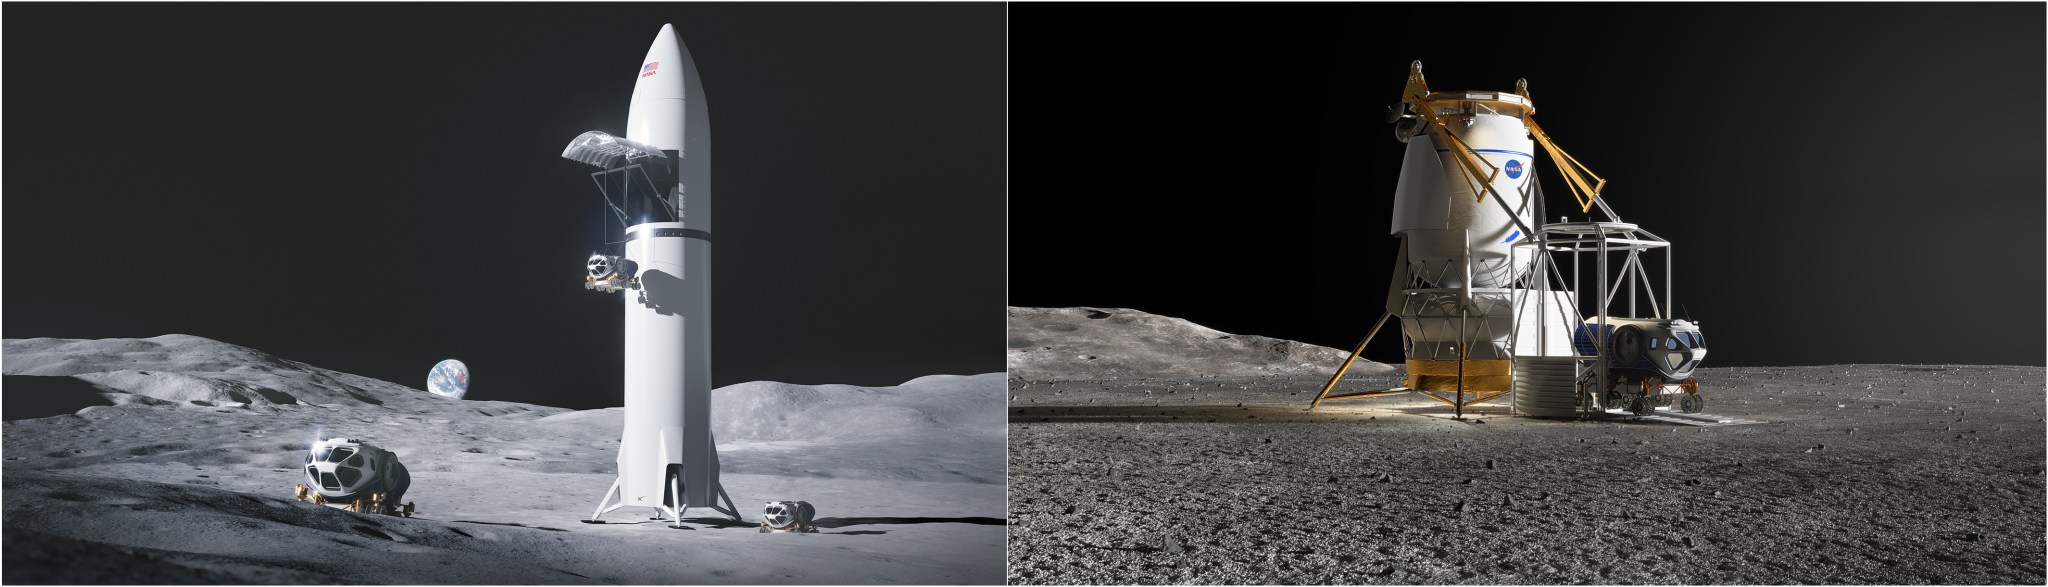 Early conceptual renderings of cargo variants of human lunar landing systems from NASA's providers SpaceX, left, and Blue Origin, right. Both industry teams have been given authority to begin design work to provide large cargo landers capable of delivering up to 15 metric tons of cargo, such as a pressurized rover, to the Moon's surface.